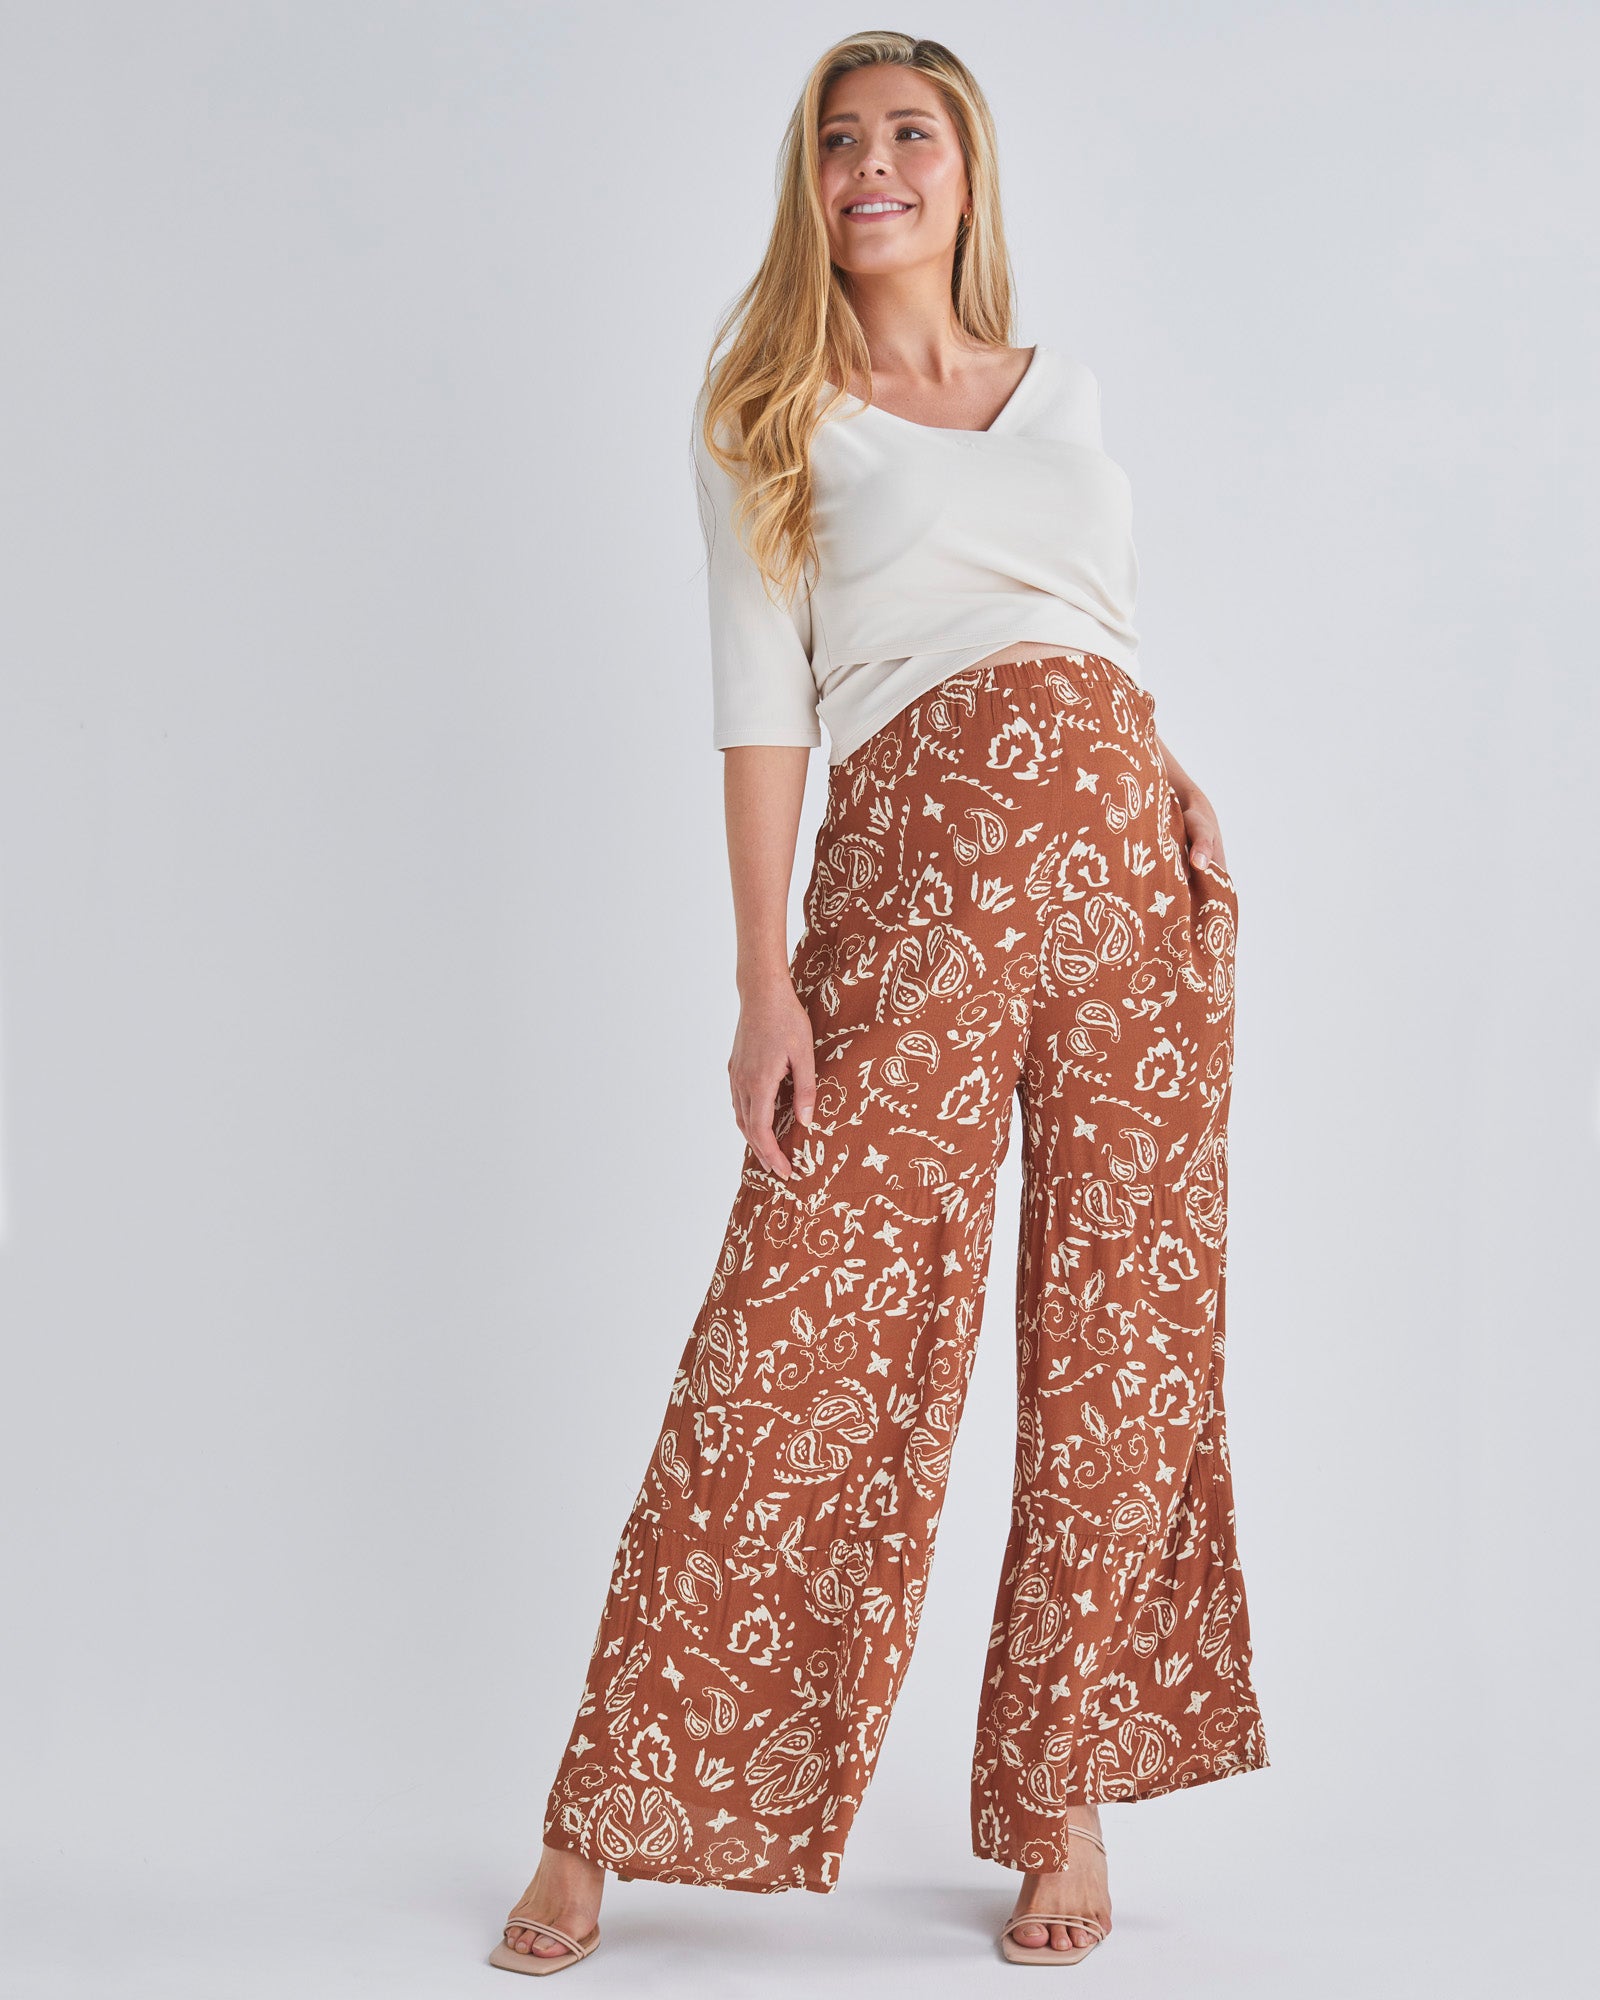 A Pregnant Woman Wearing Stacie Wide Leg Maternity Ruffled Pants in Paisley Print from Angel Maternity